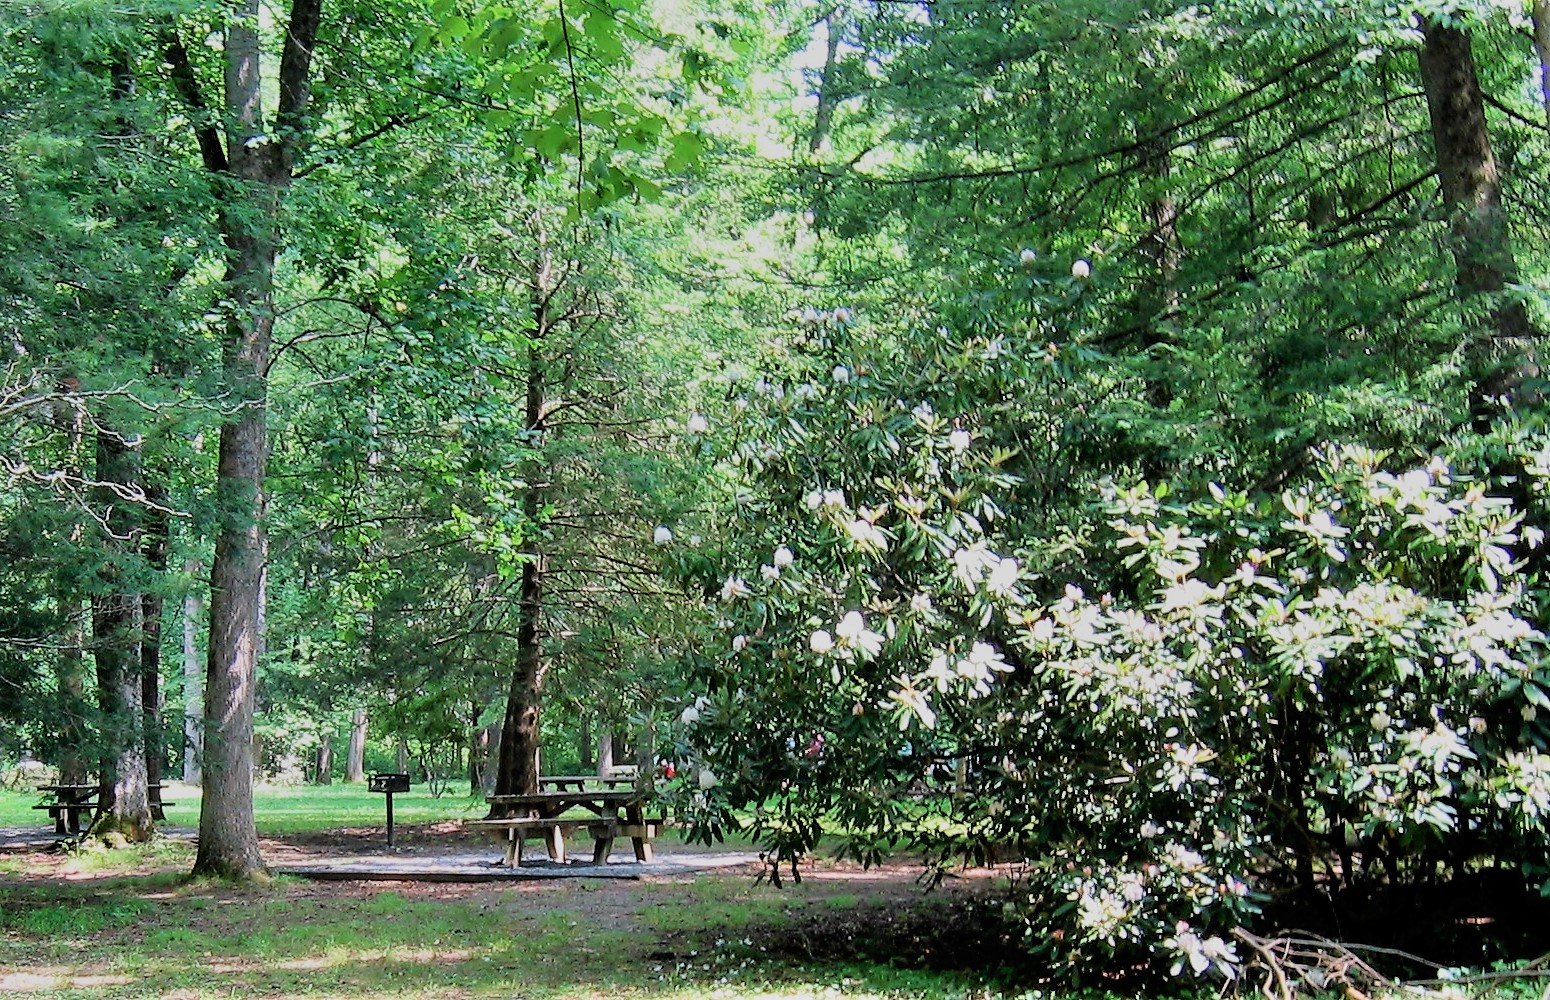 Sycamore Flats Picnic Area, Pisgah National Forest